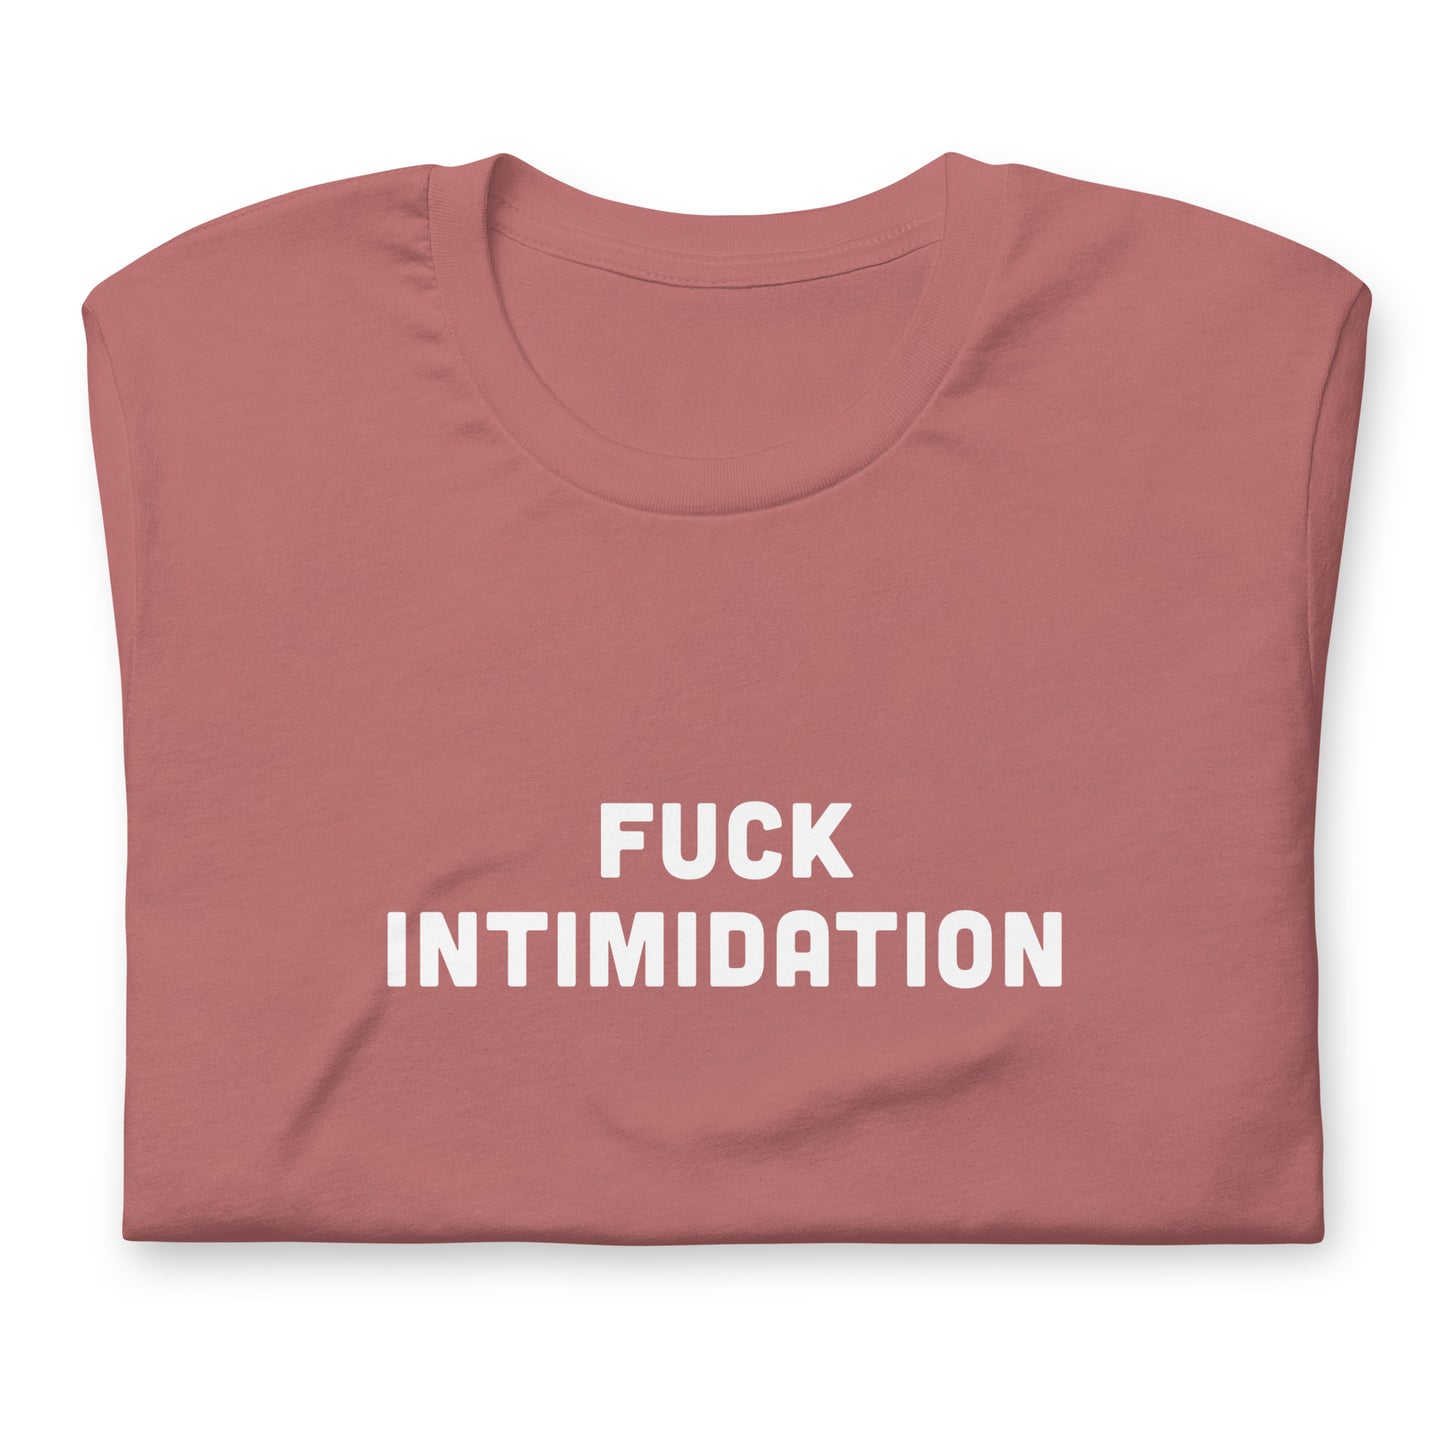 Fuck Intimidation T-Shirt Size 2XL Color Navy